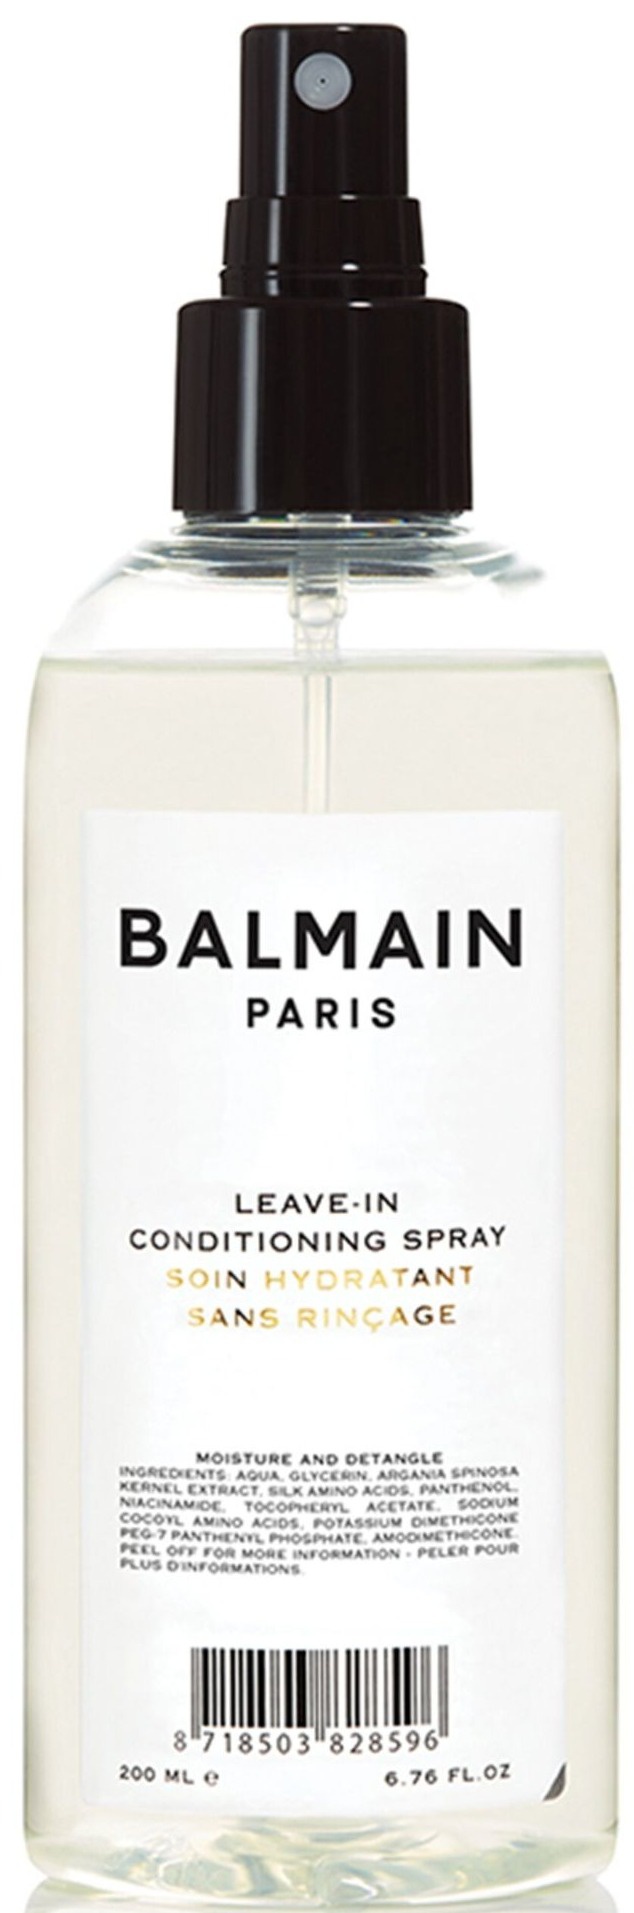 Balmain Hair Couture Leave-in Conditioning Spray